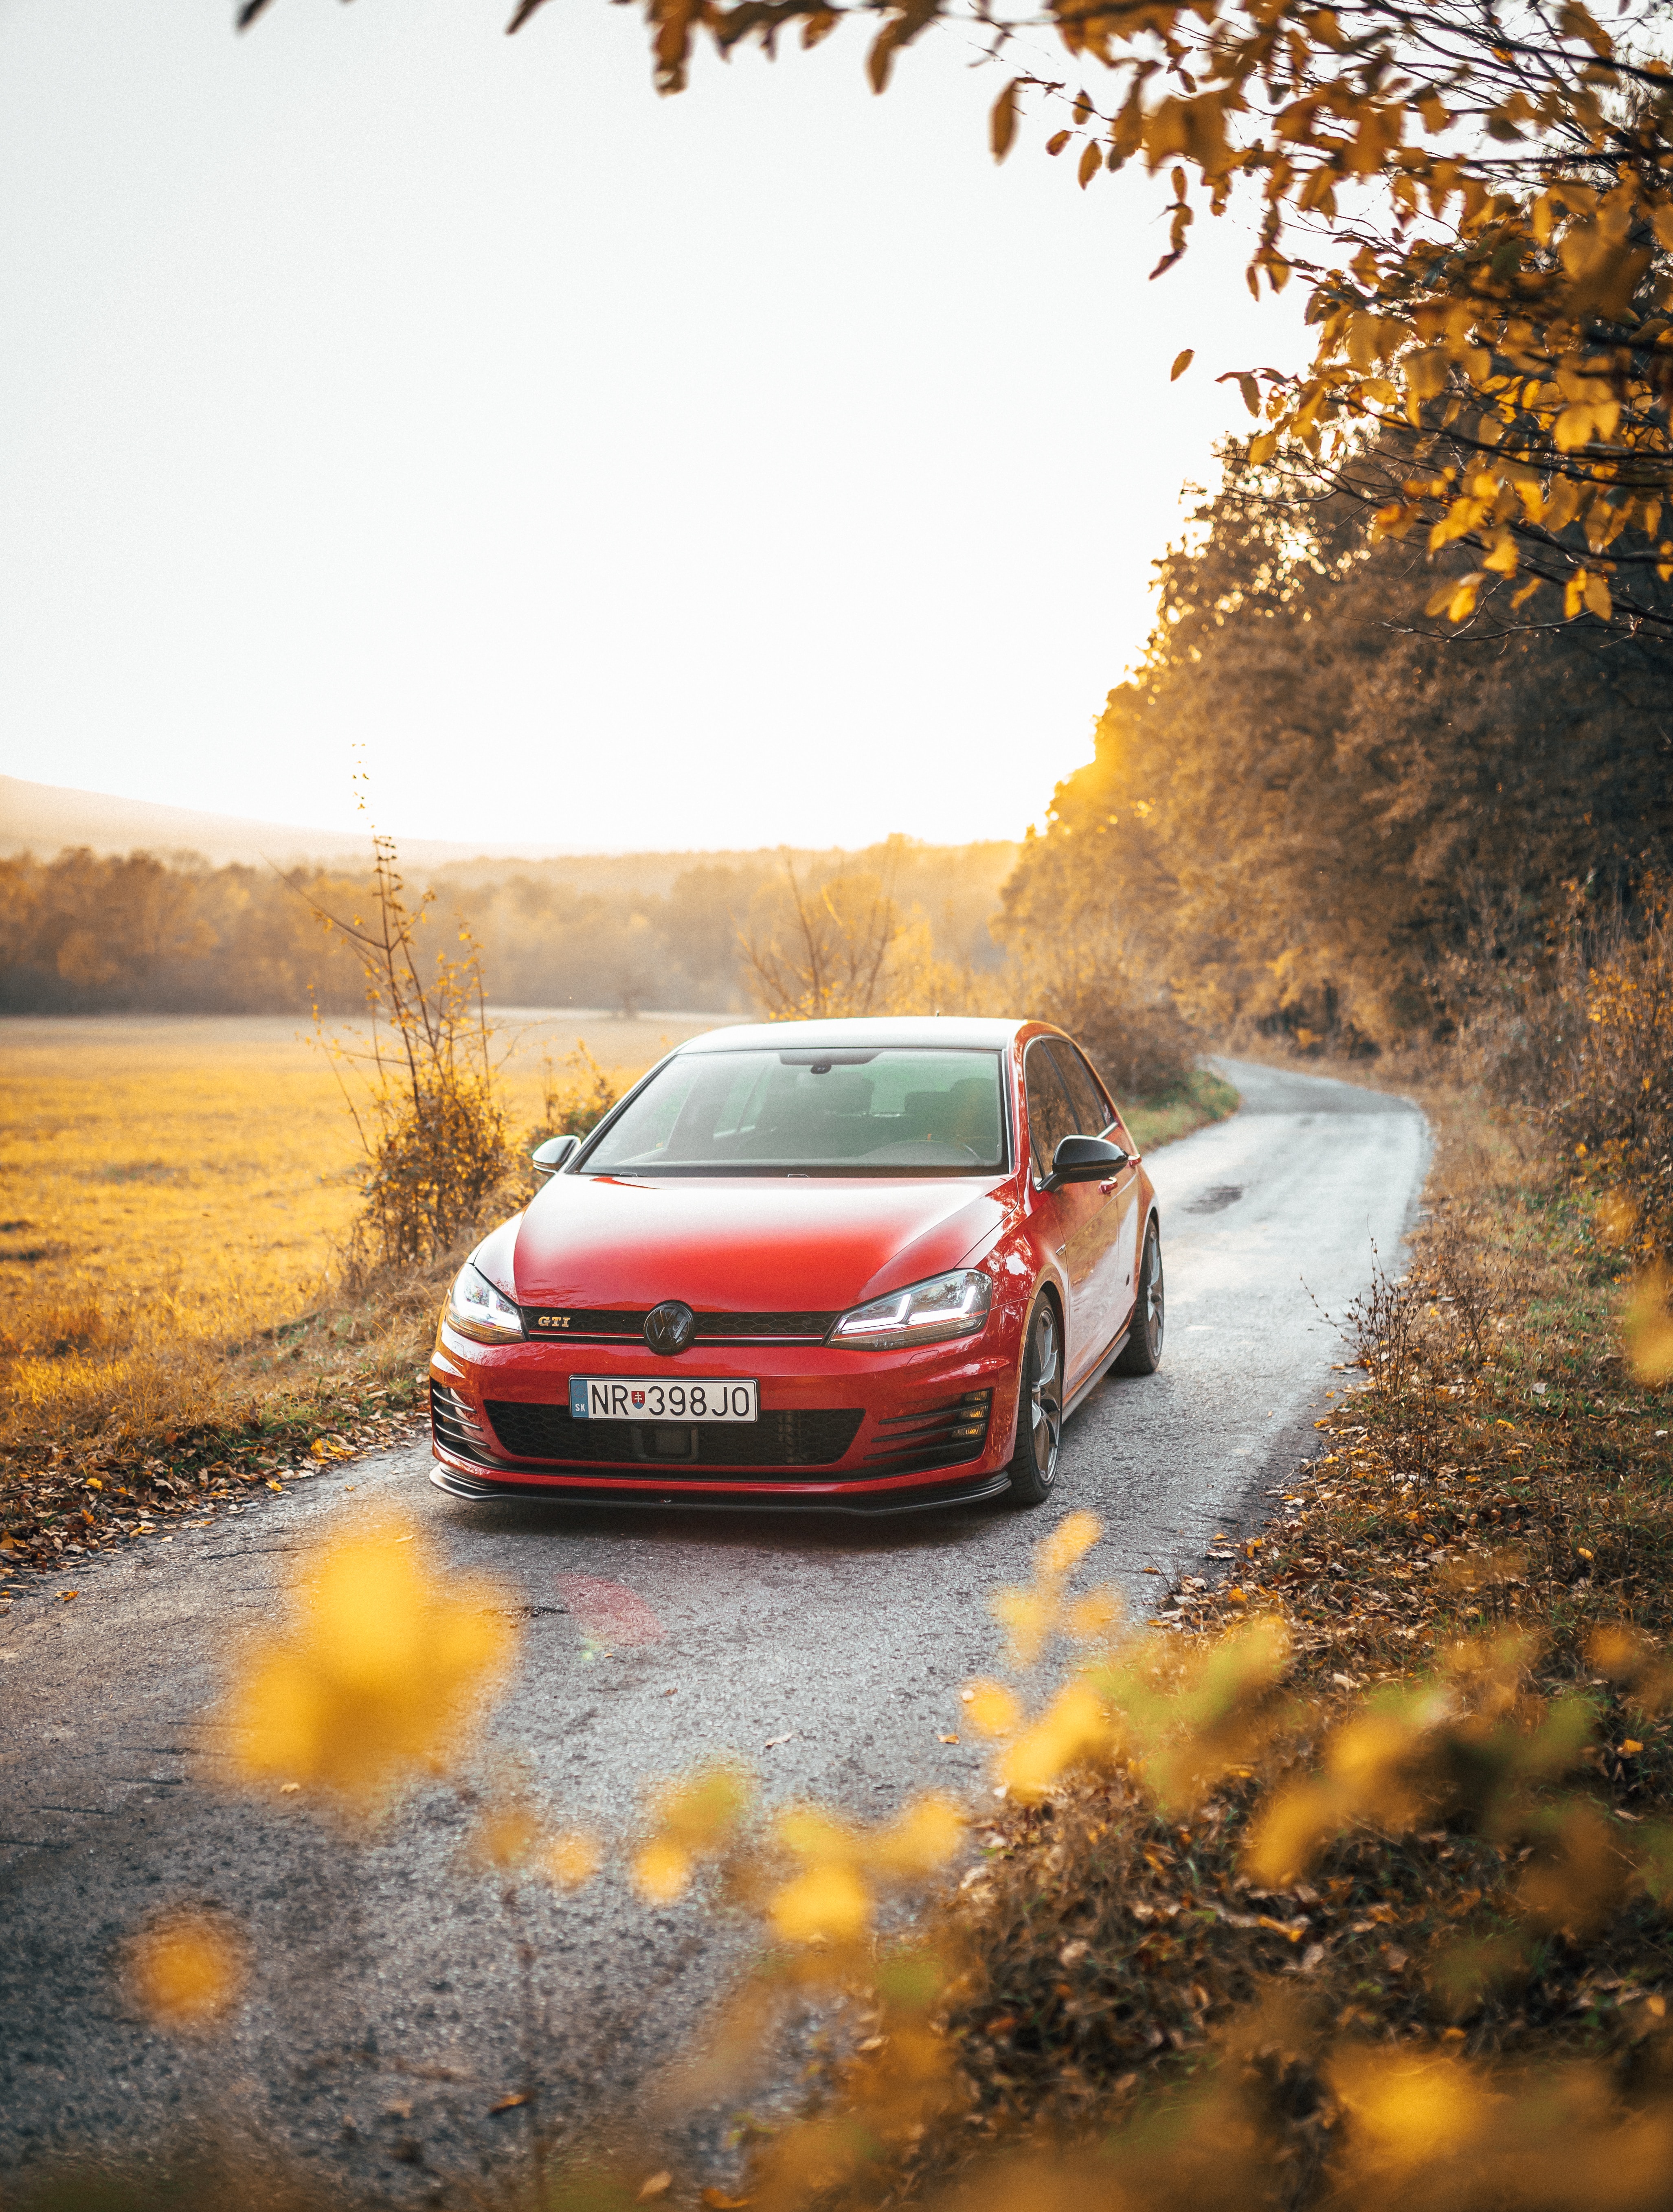 volkswagen golf gti, volkswagen, nature, cars, red, road, car, front view, machine Full HD